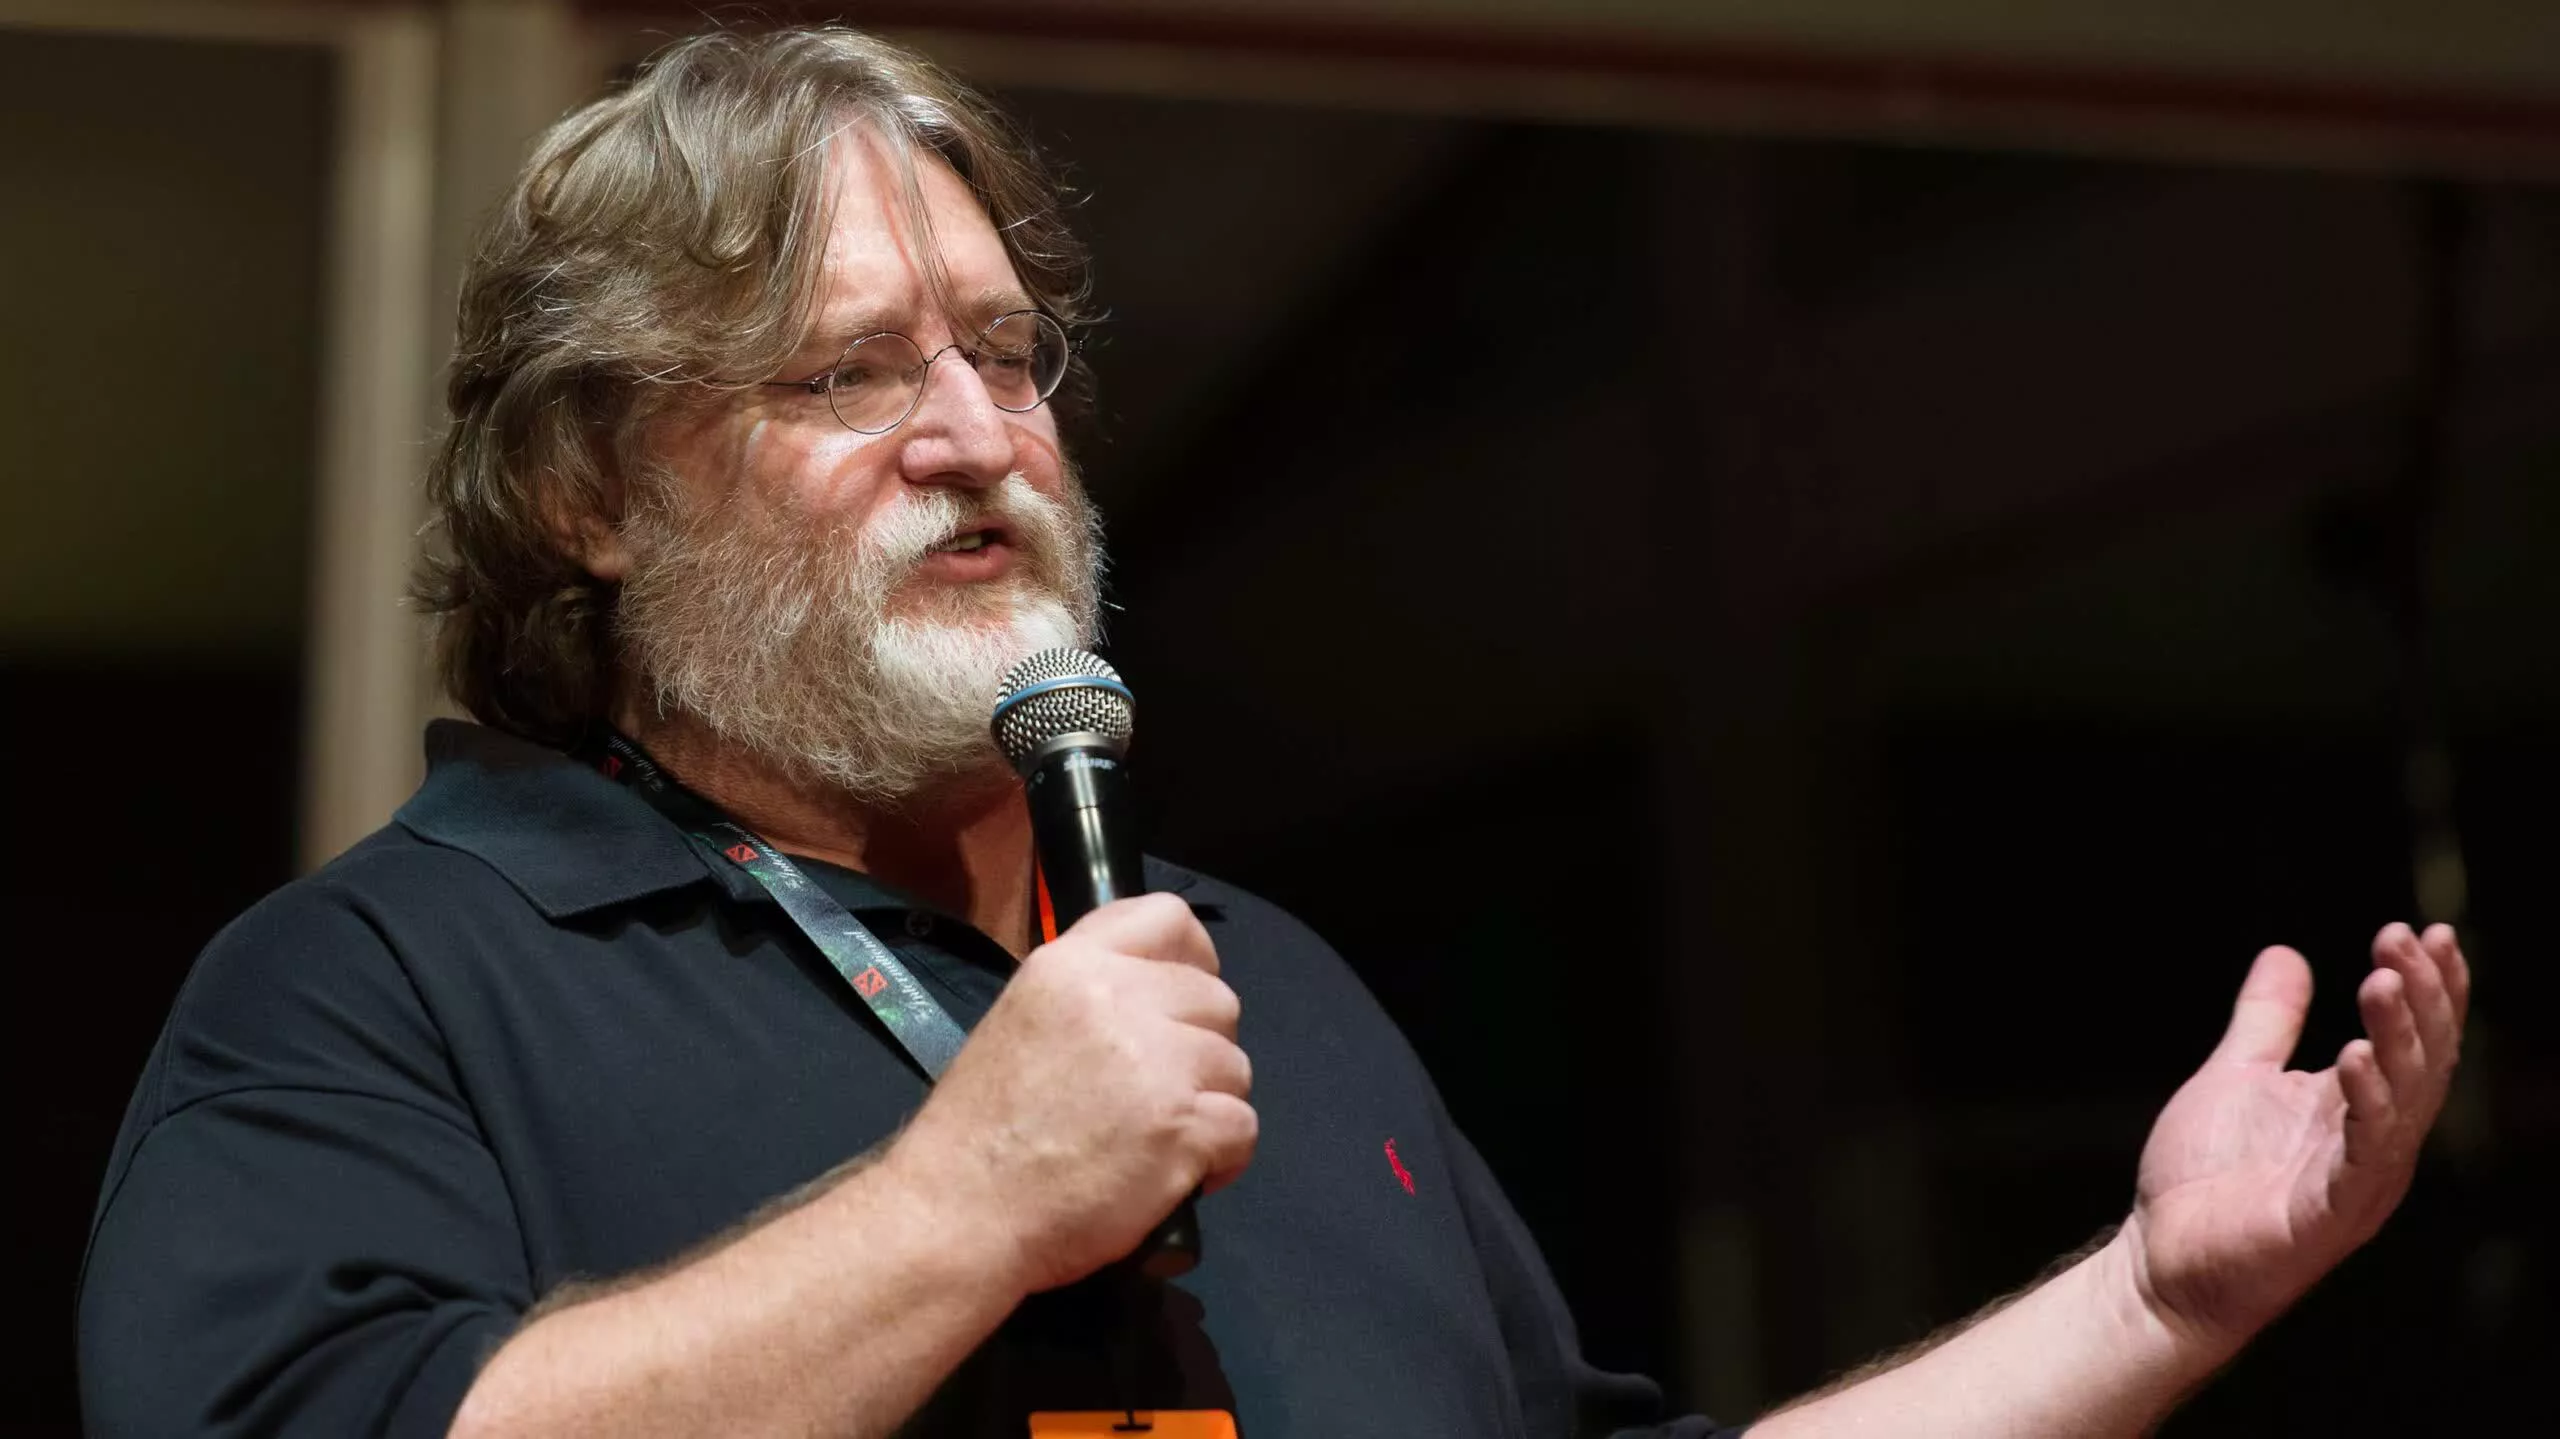 Gabe Newell says that 50% of Bitcoin transactions were fraudulent when Steam accepted the crypto thumbnail